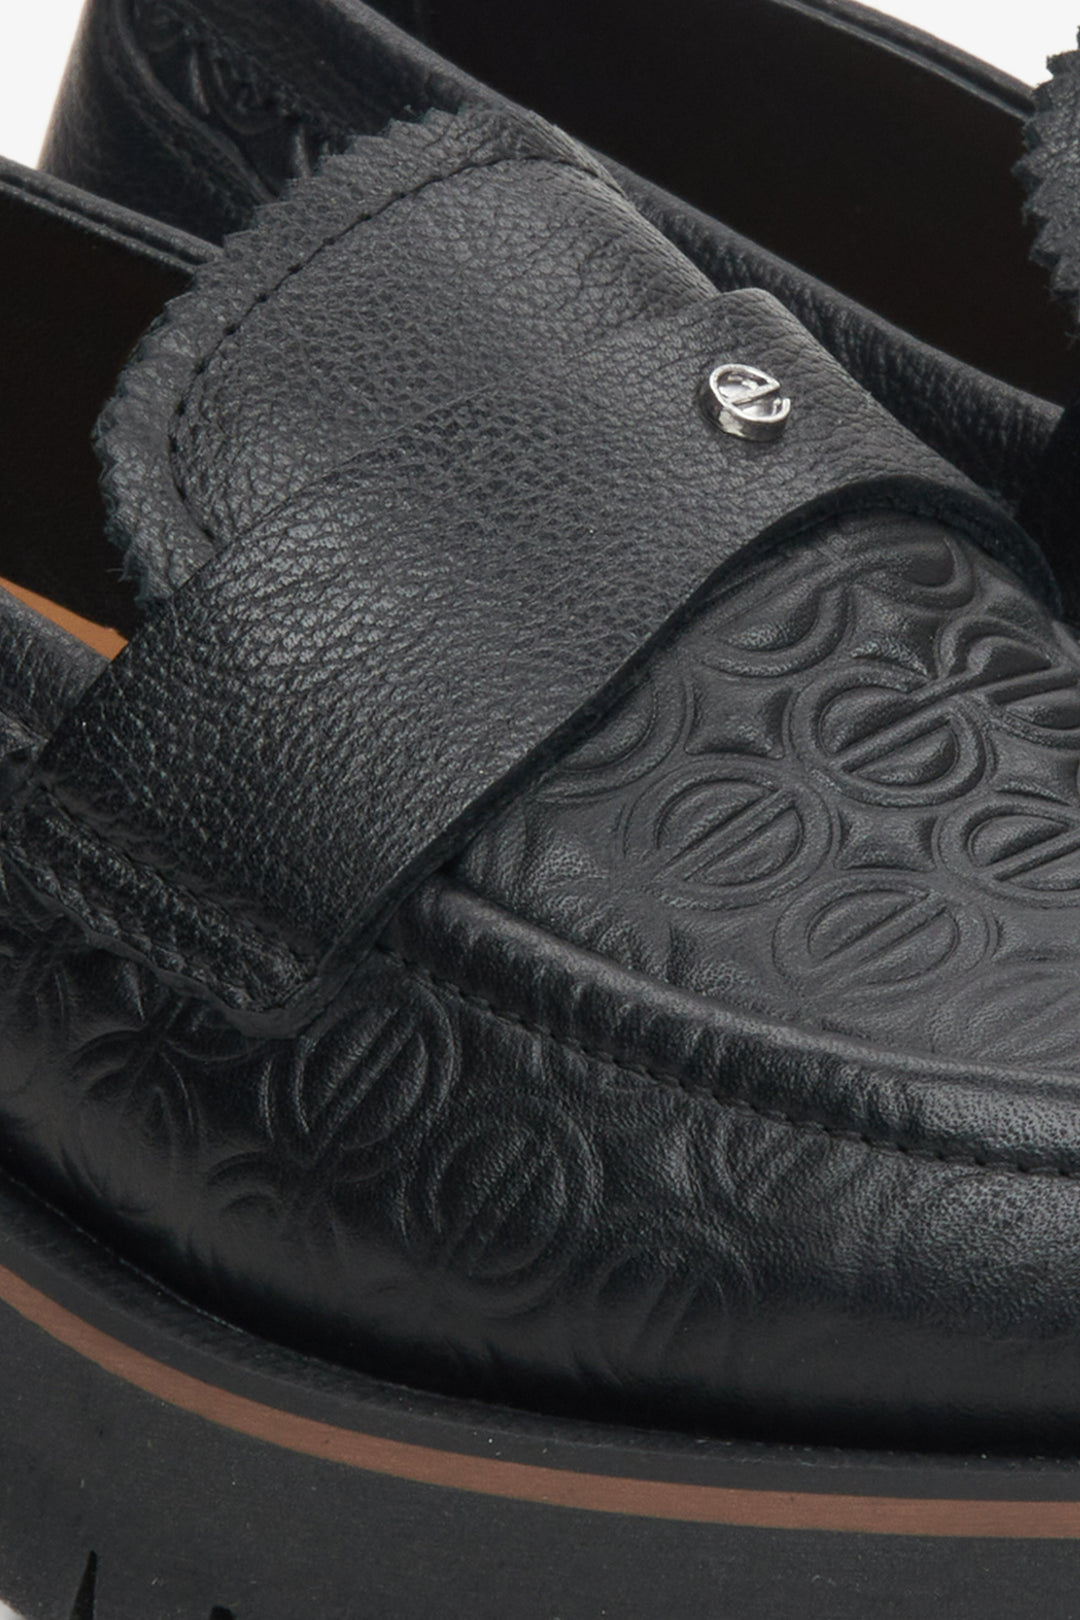 Women's black leather loafers by Estro - close-up on the details.